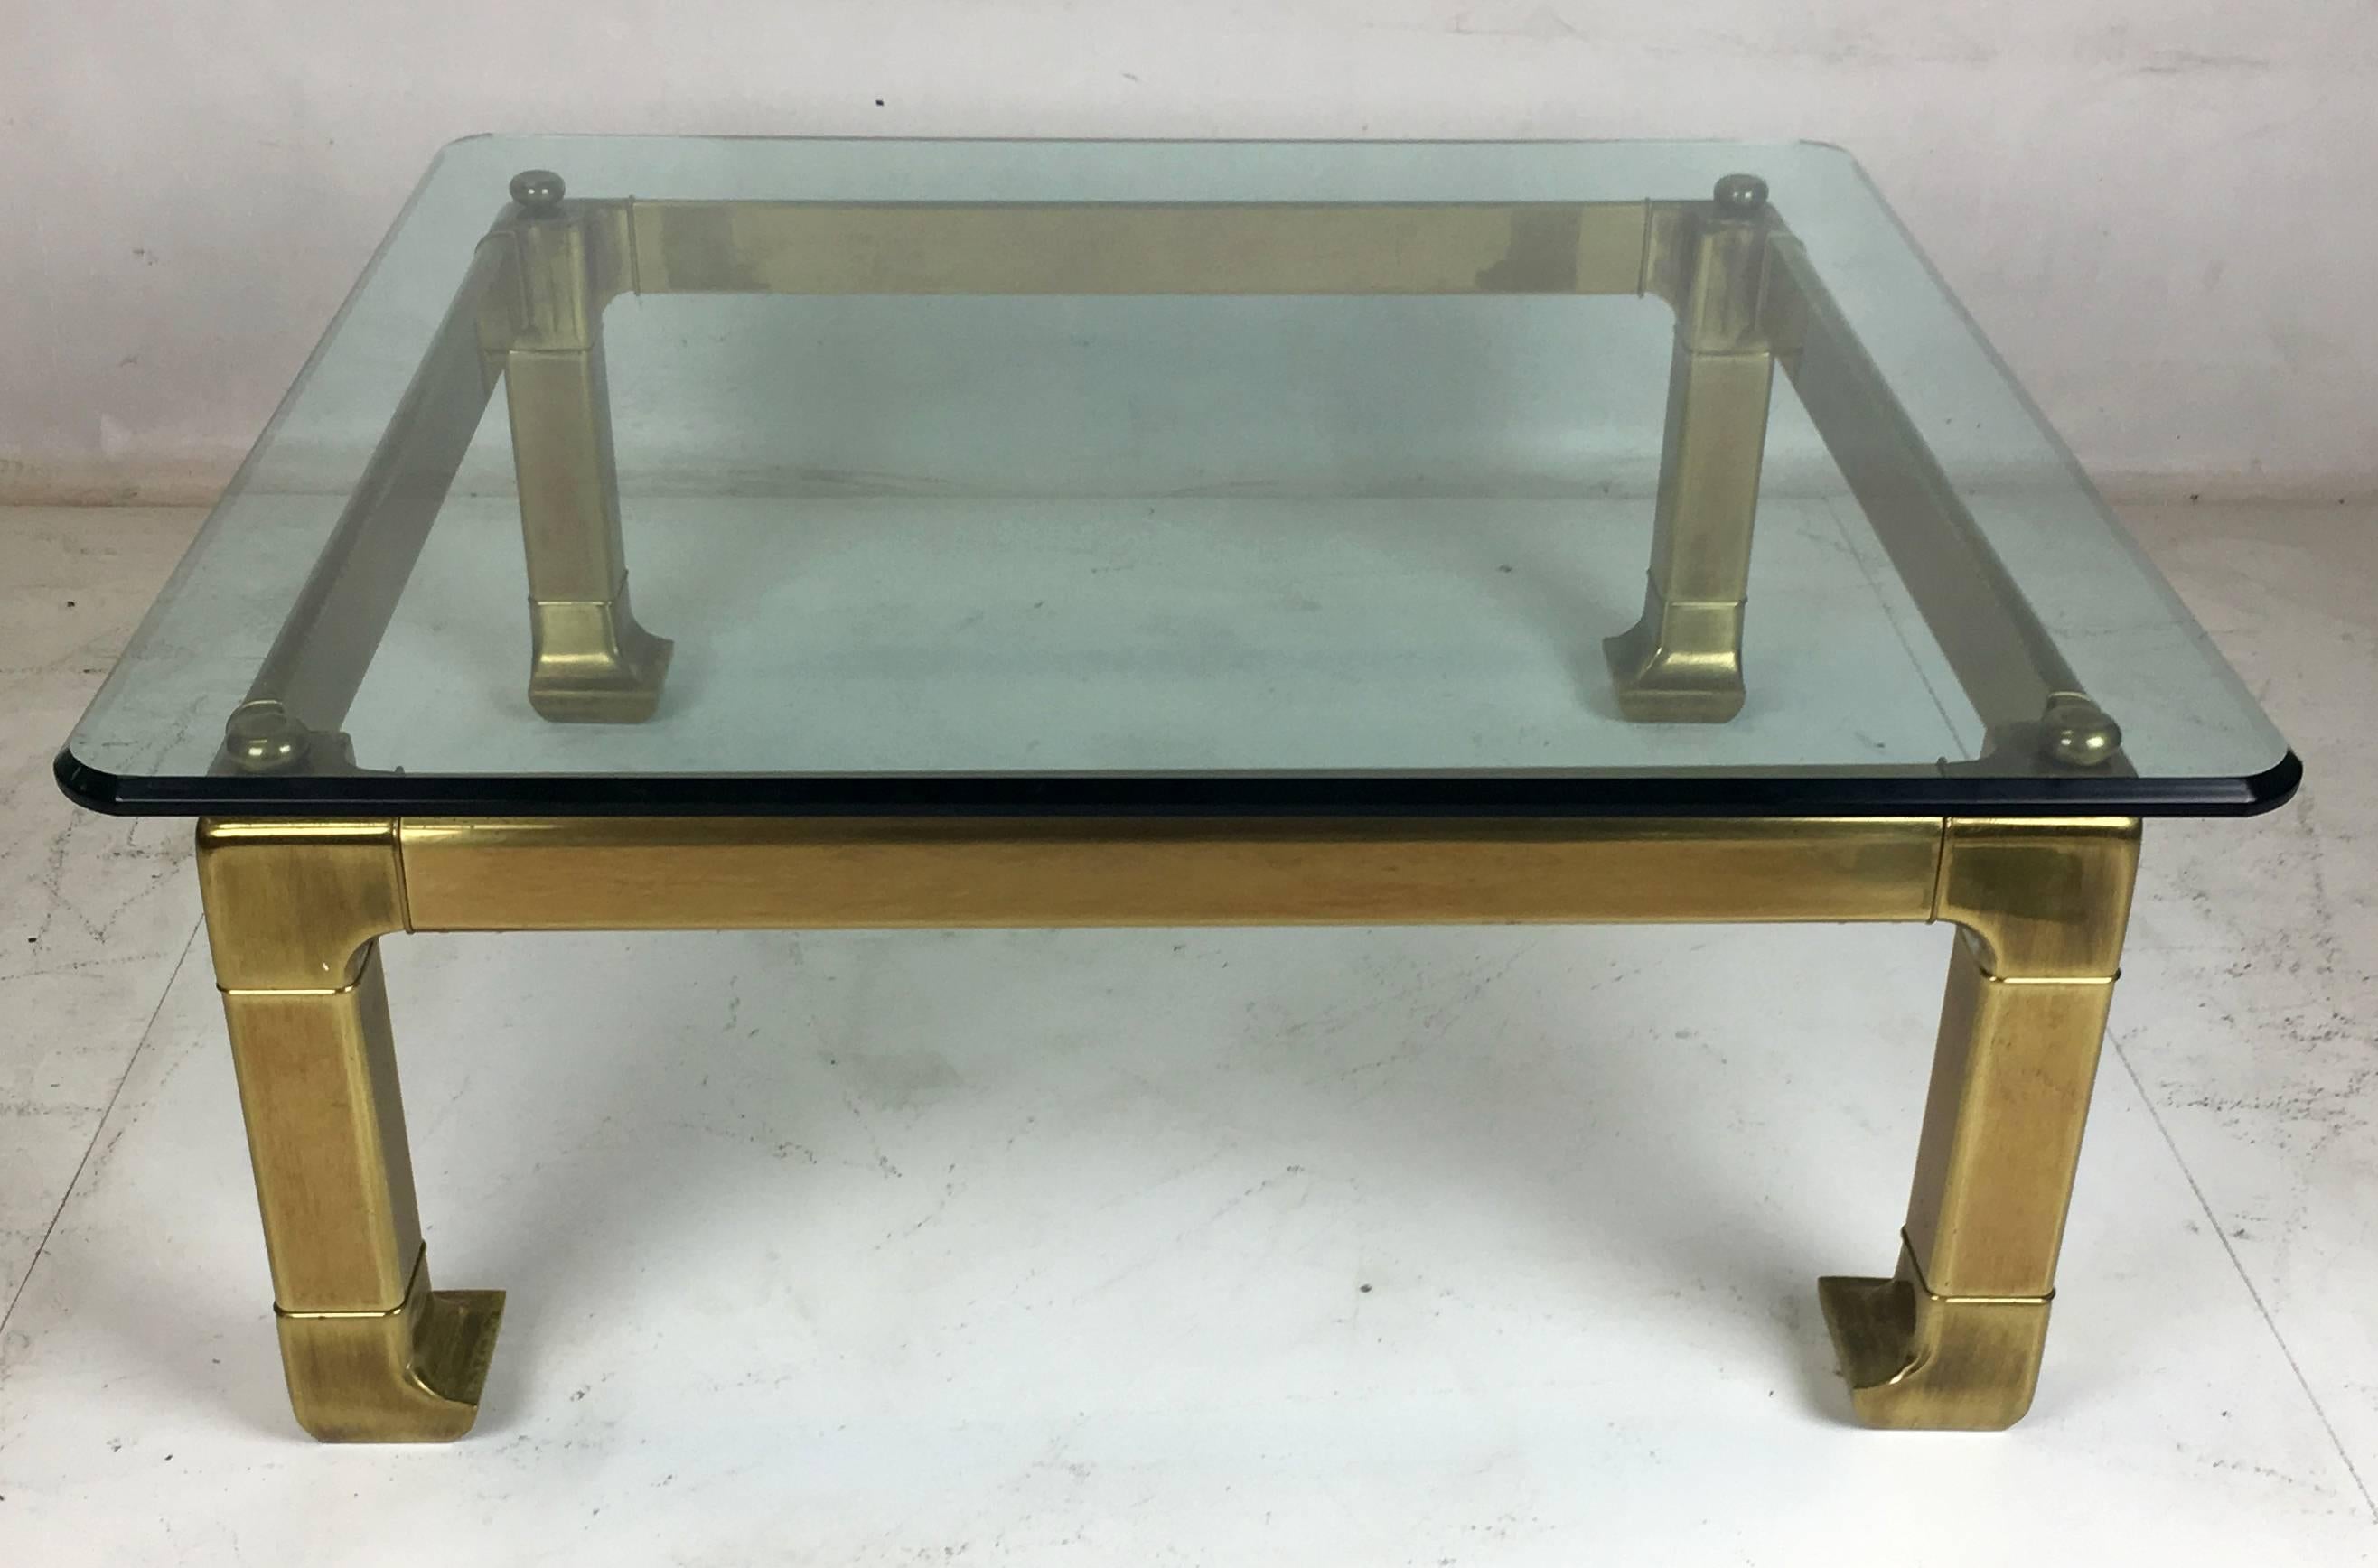 Mastercraft coffee table constructed of heavy, solid brass with a 3/4